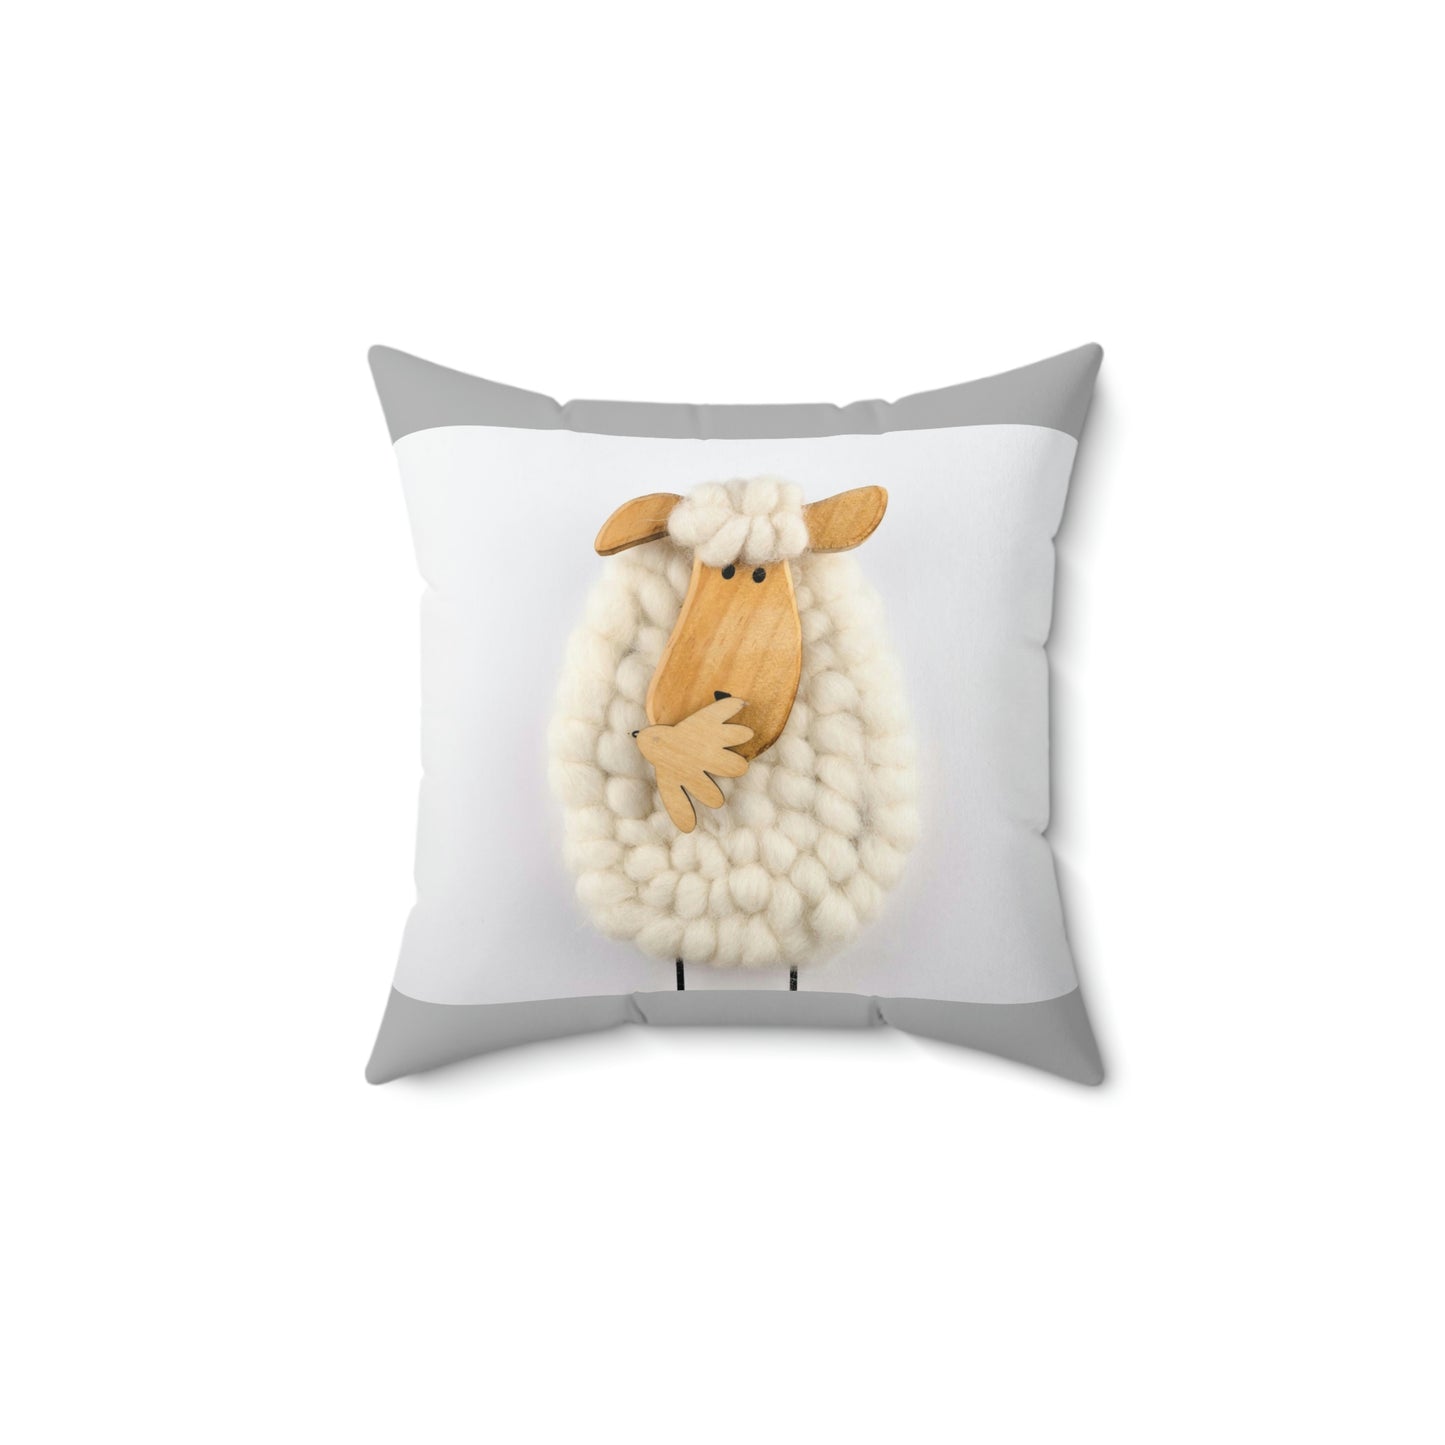 Sheep Pillow Case - Light Gray and White Colors - Faux Suede Square Pillow Case